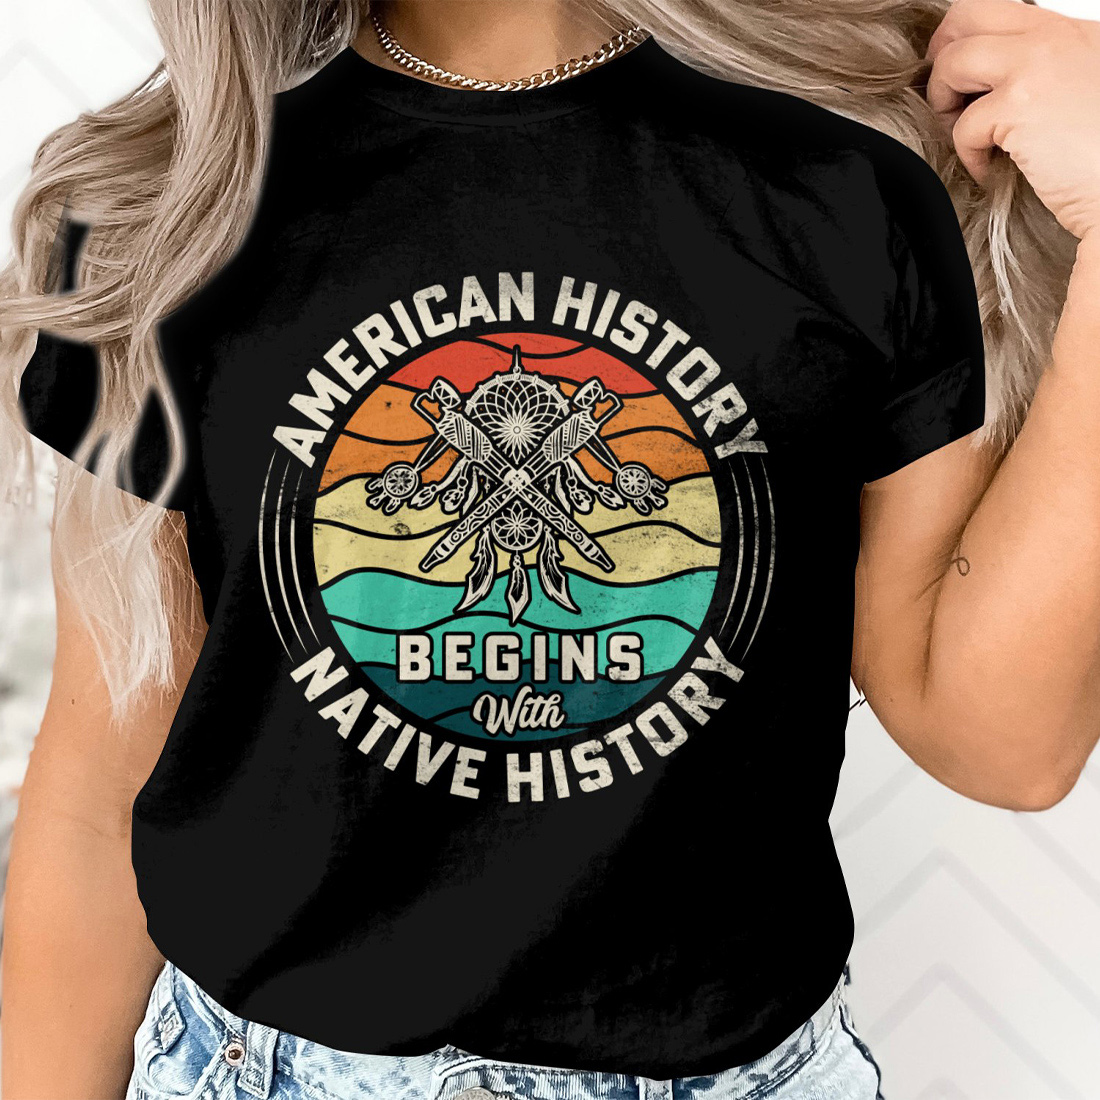 American History Begins with Native History, Native American T-Shirts, Native American Pride Shirts preview image.